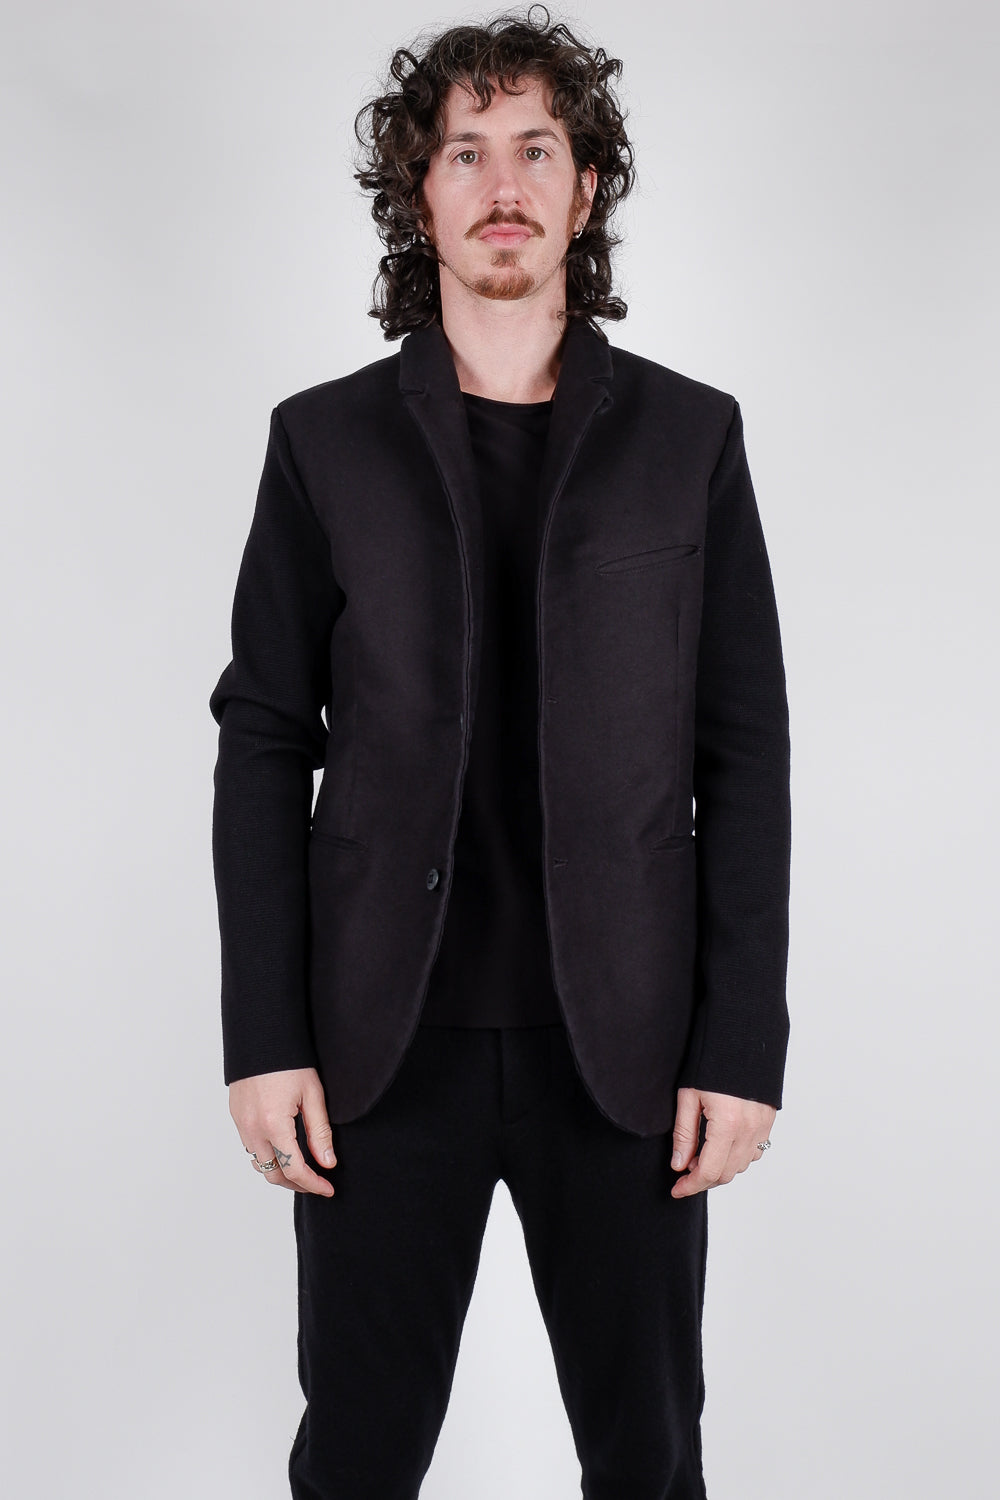 Buy the Buy the Hannes Roether Two-Toned Heavy German Cotton Jacket at Intro. Spend £50 for free UK delivery. Official stockists. We ship worldwide.